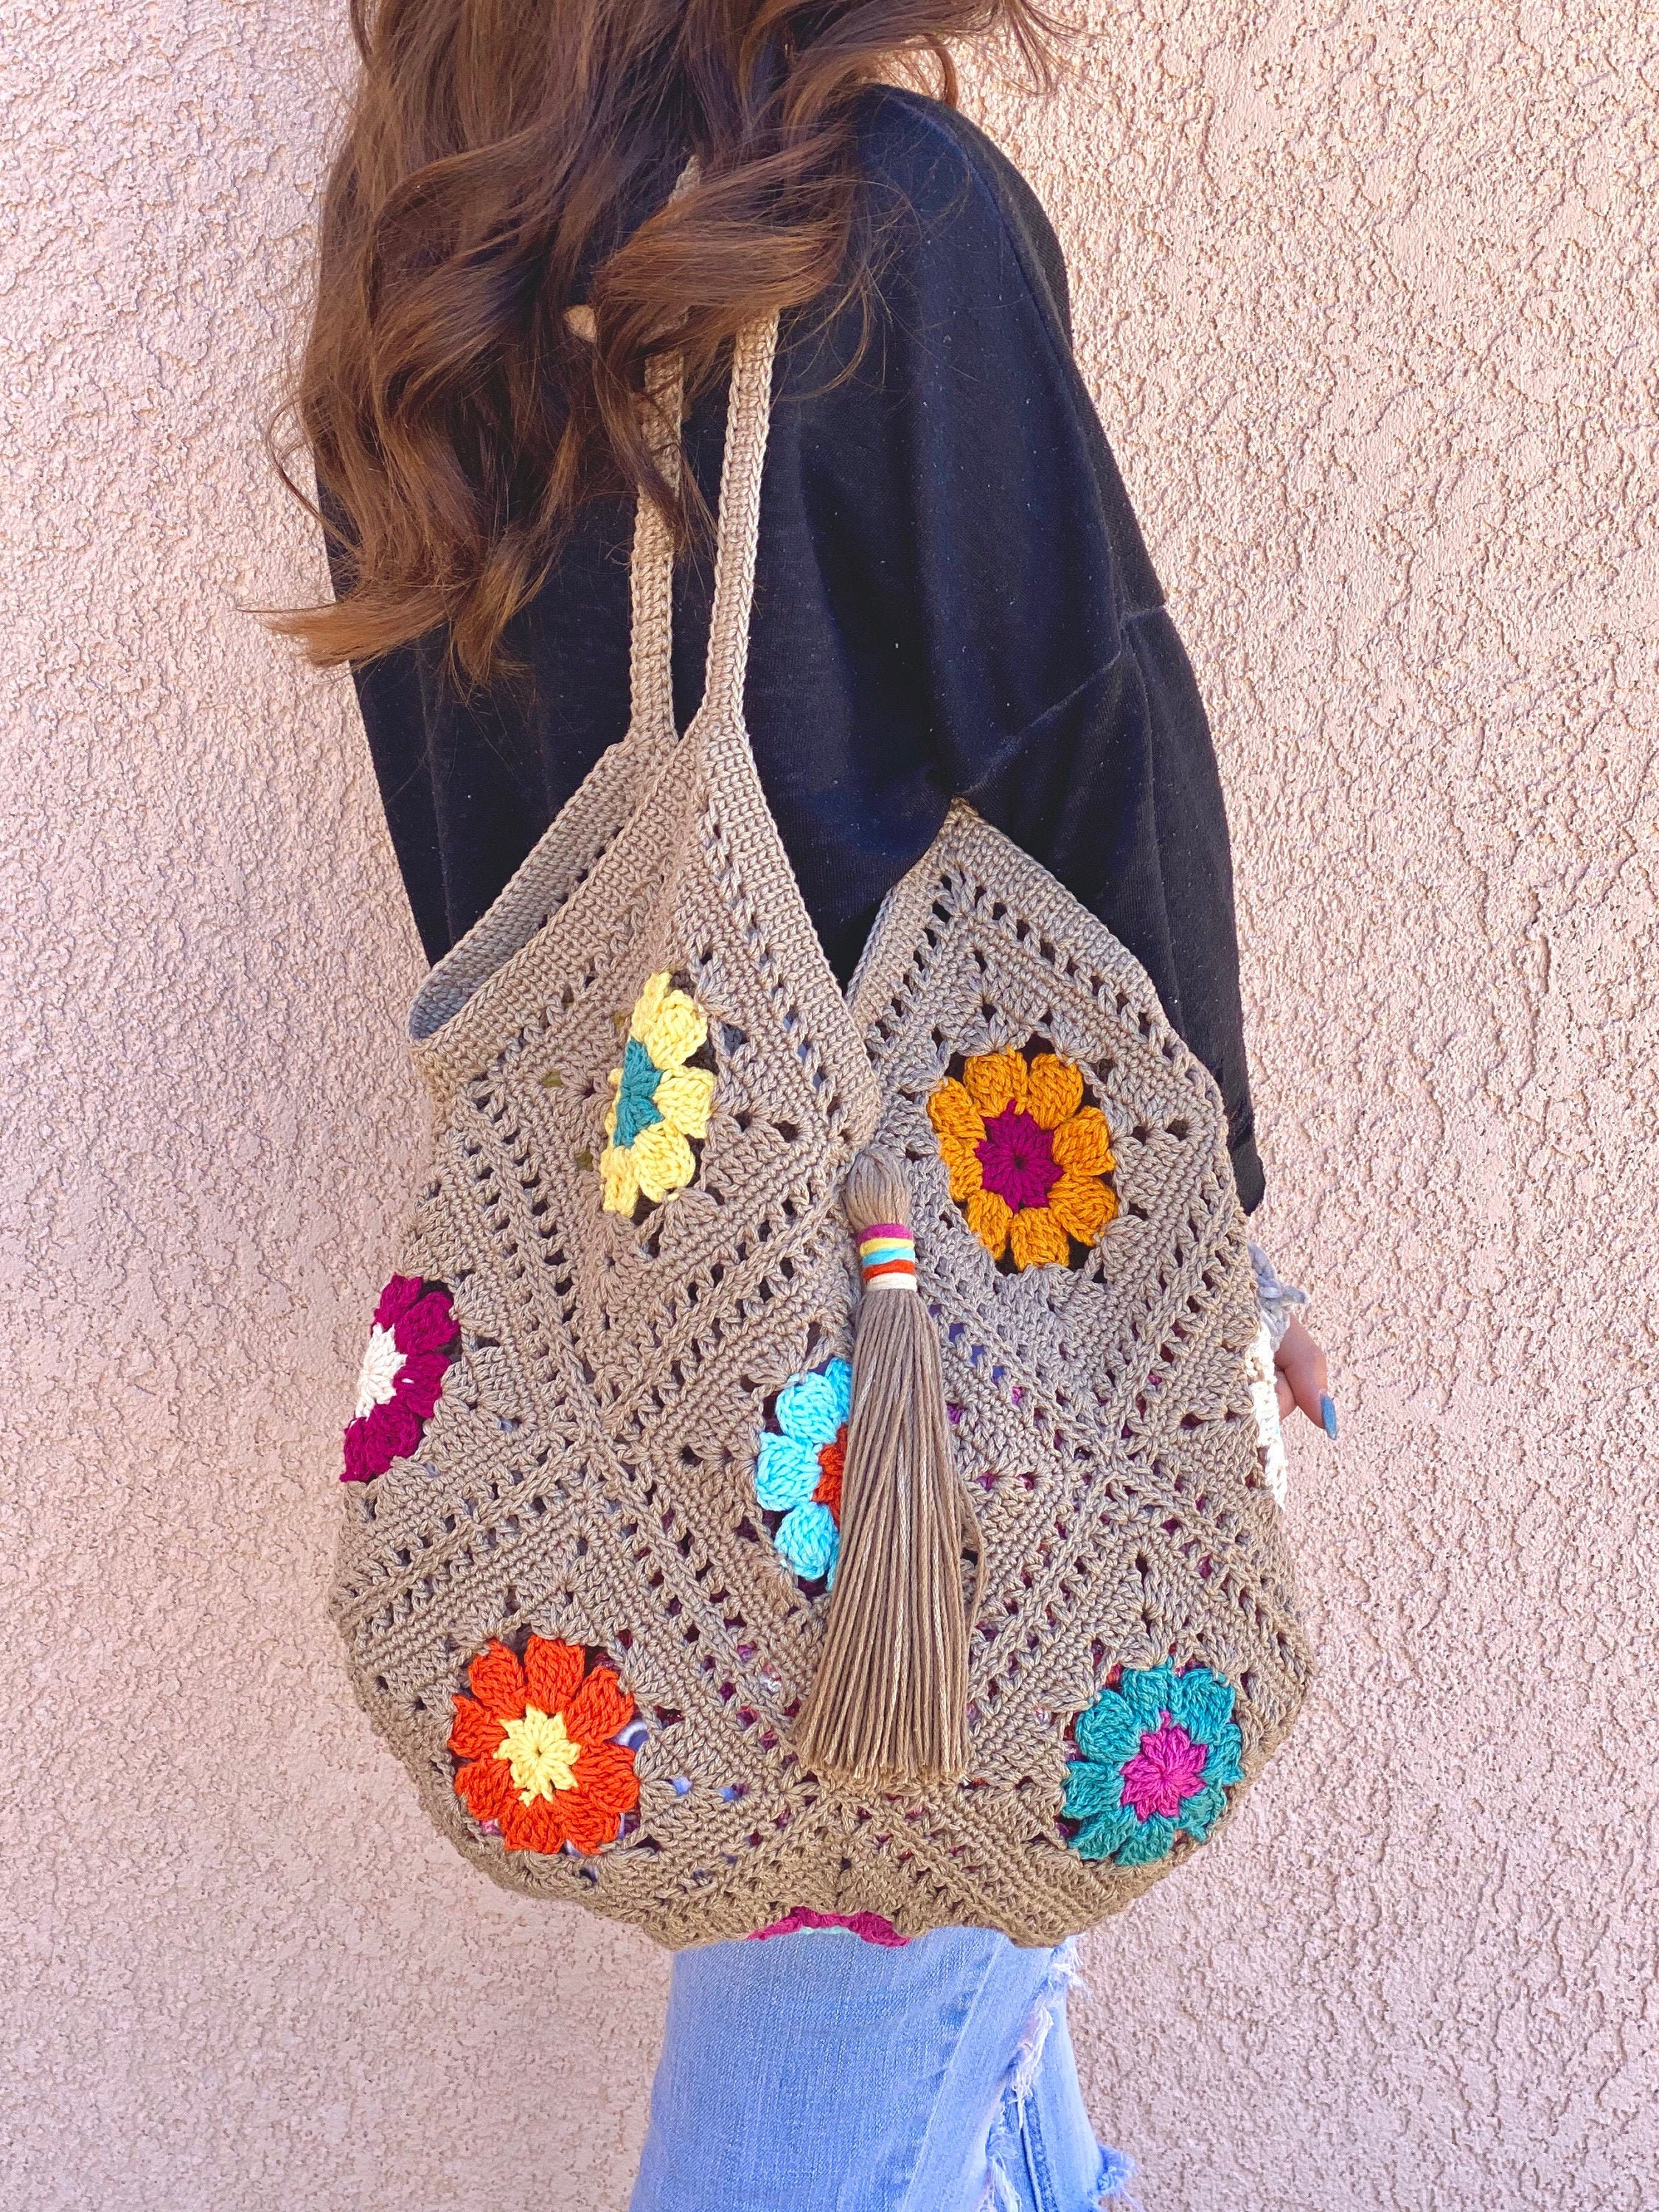 Pin by emily brown on diy jewelry  Bags, Purses and handbags, Boho bags